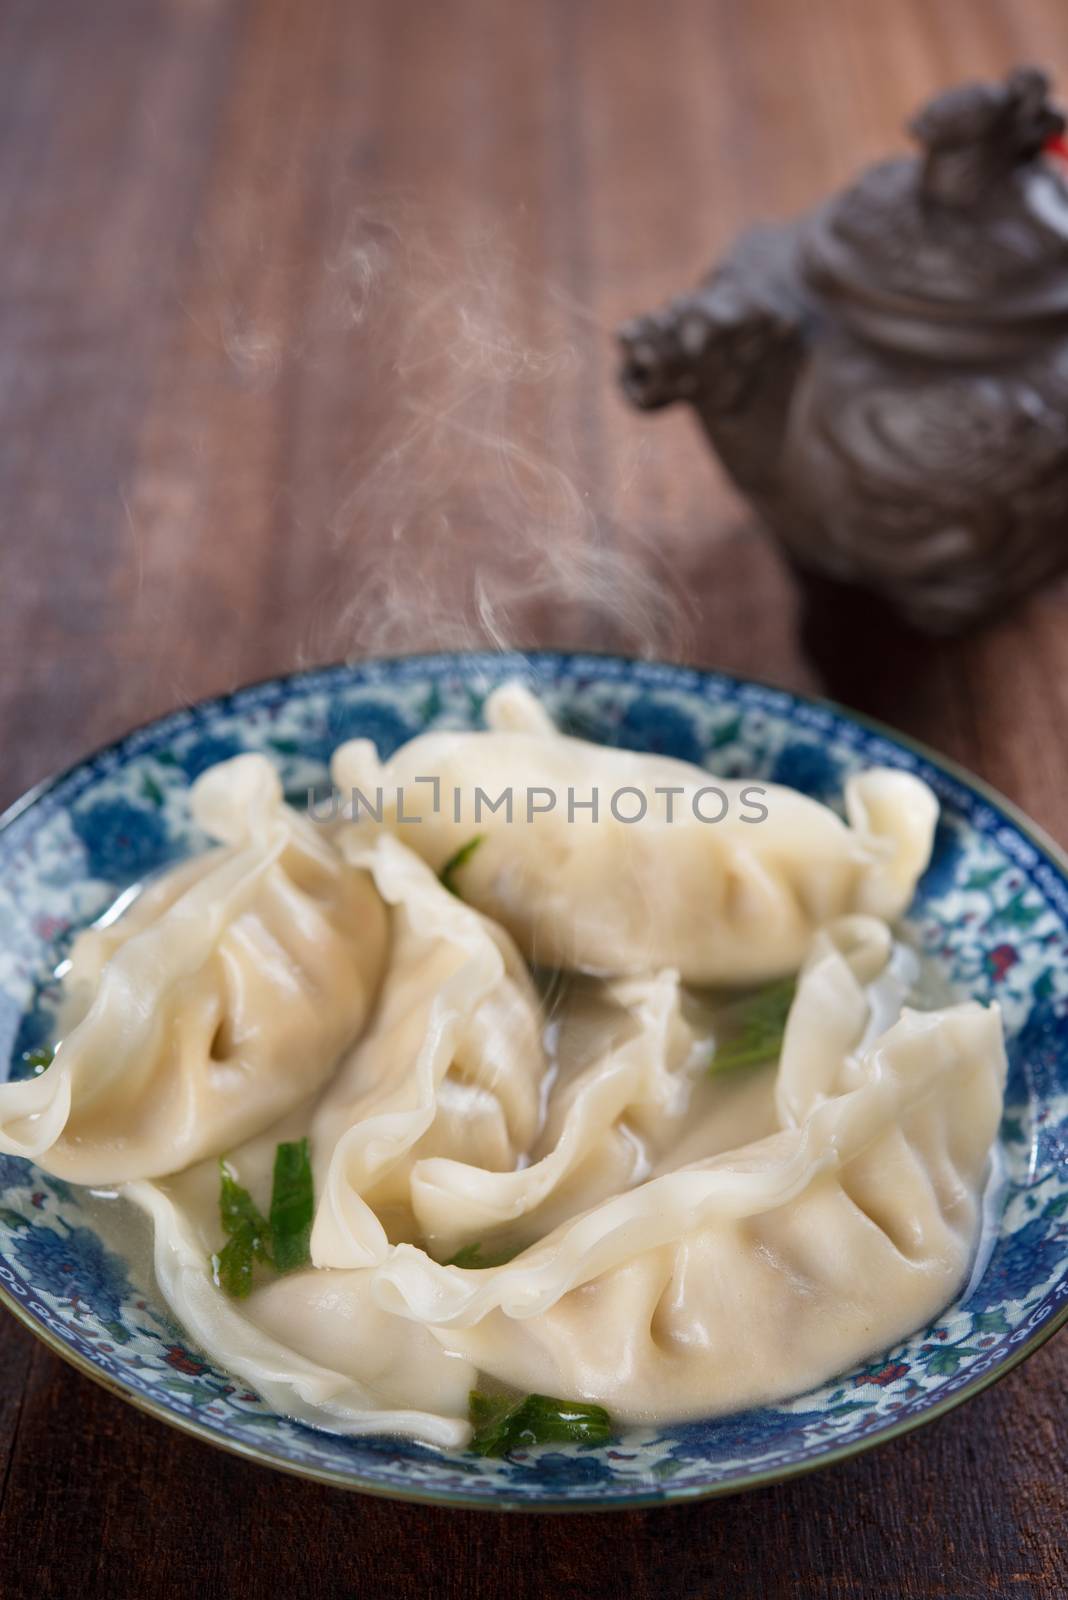 Fresh dumplings soup on plate with hot steams. Chinese cuisine on old vintage wooden background.